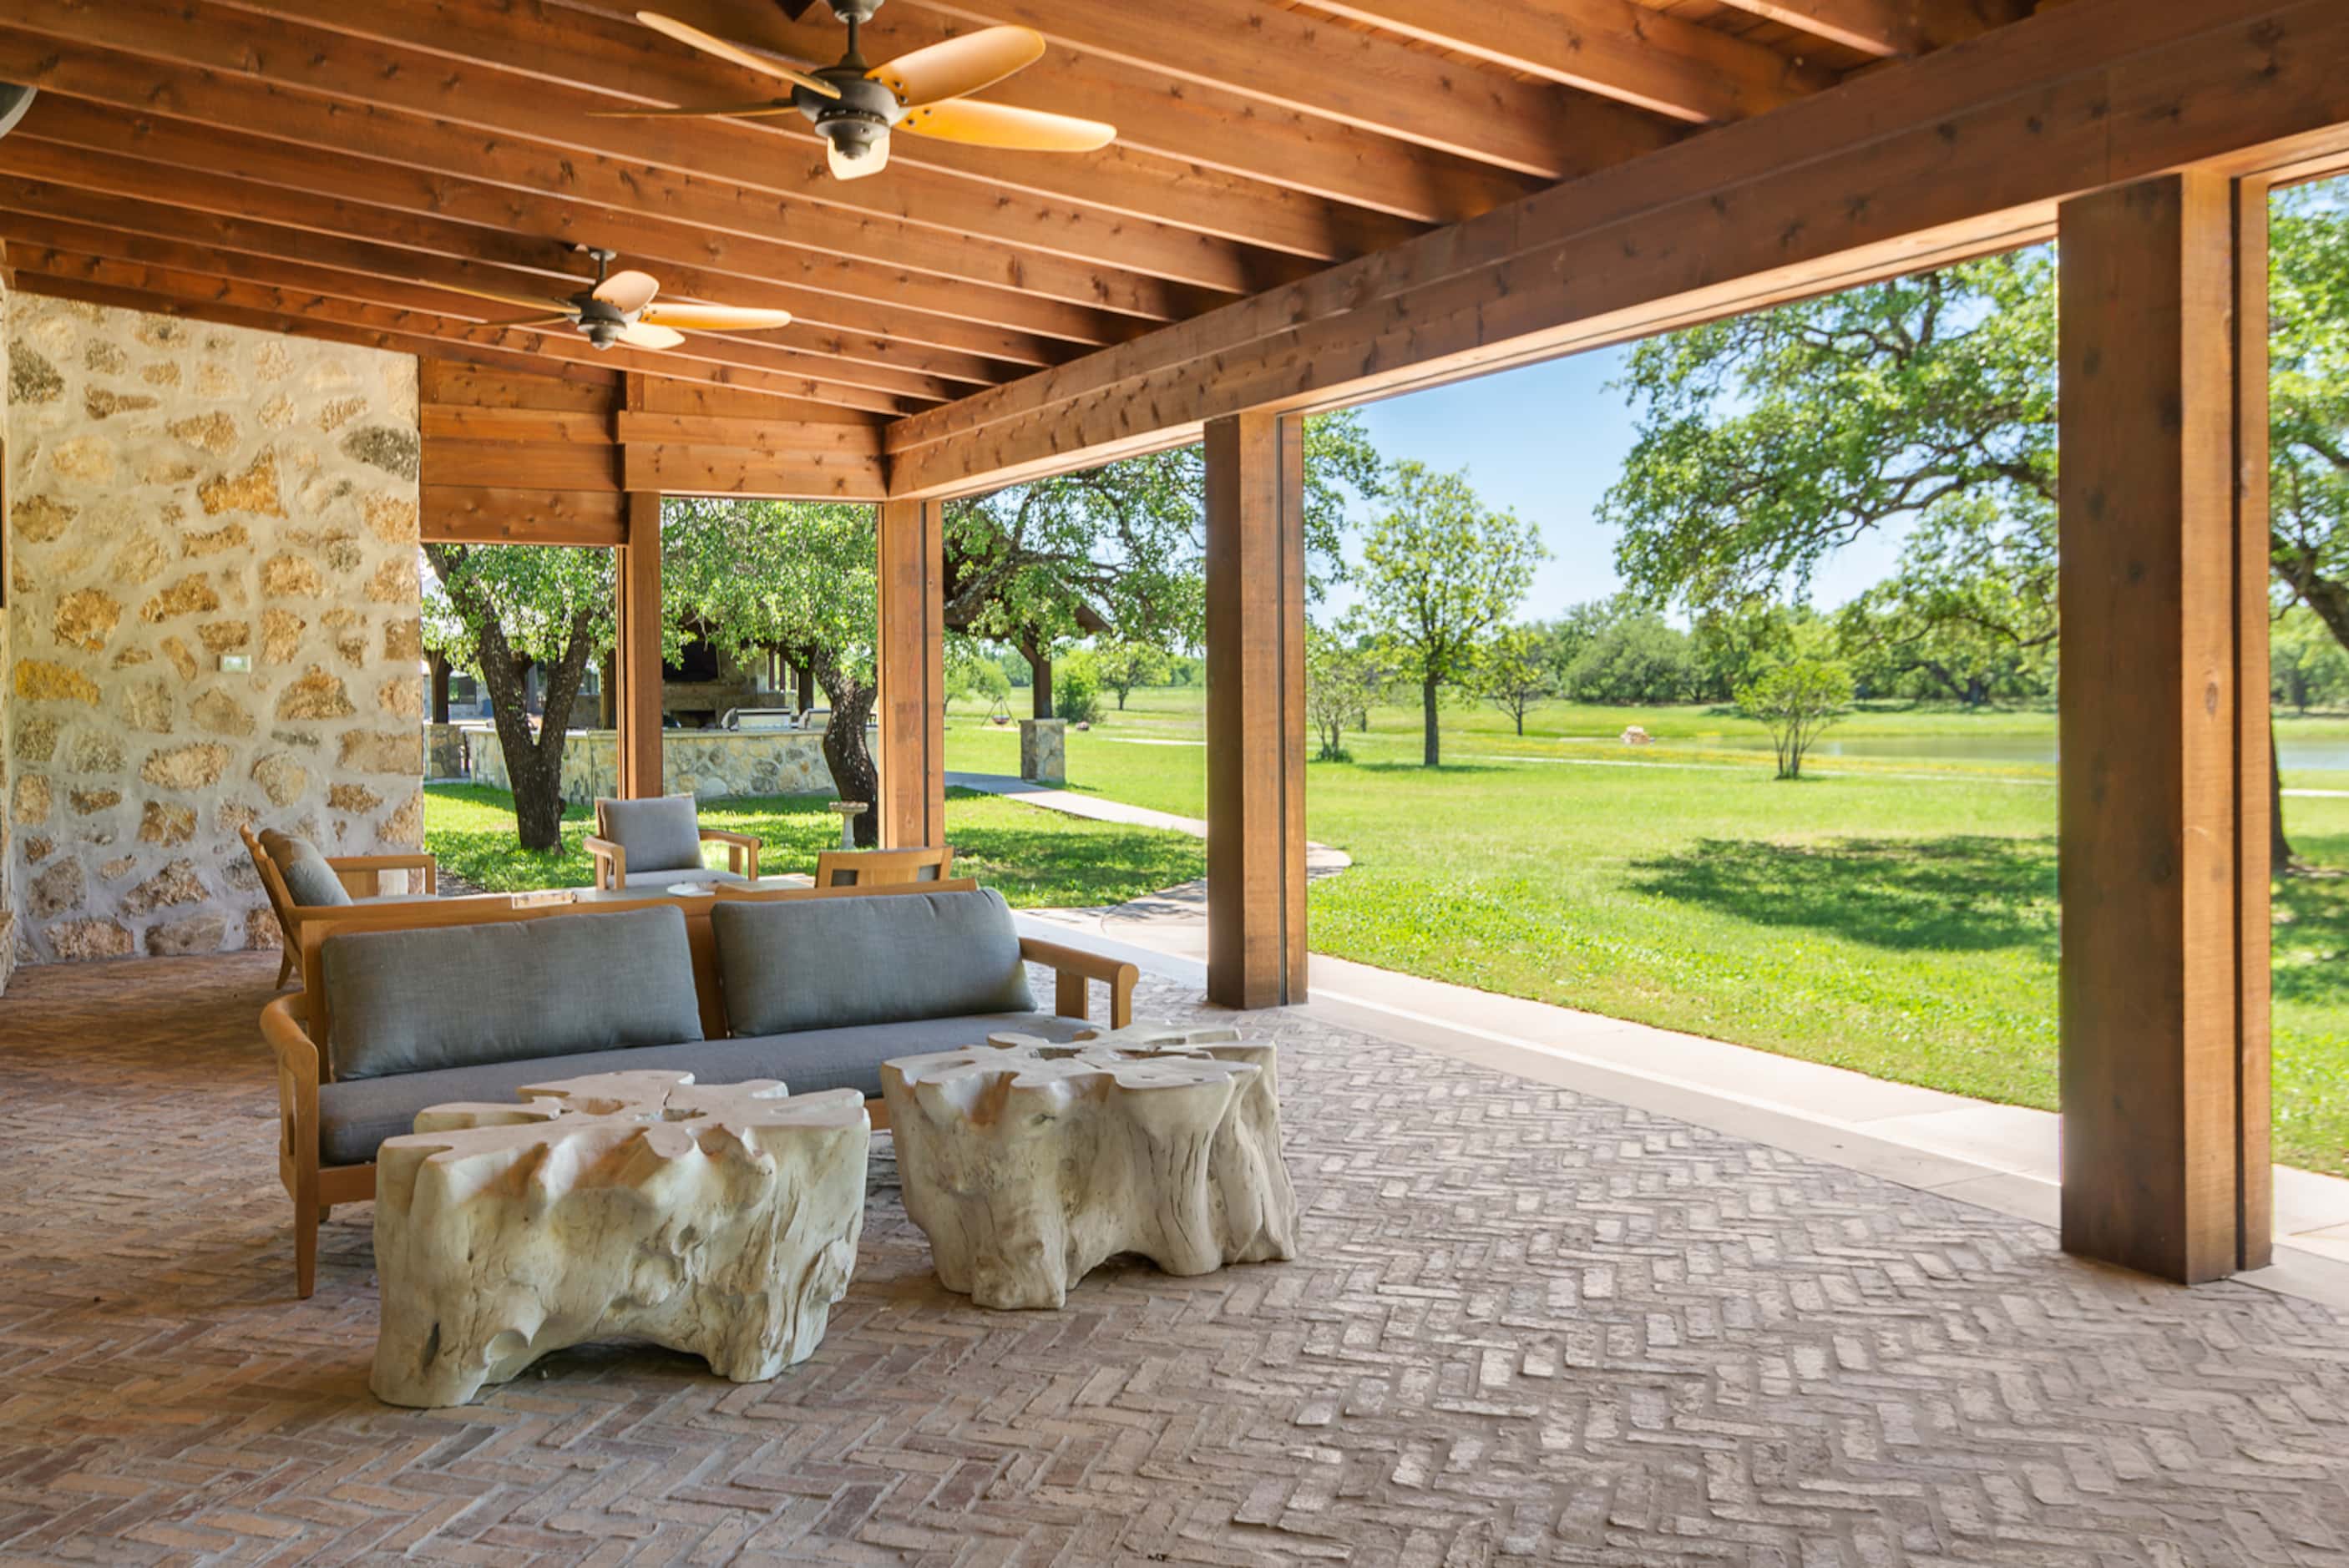 The property features ample outdoor space to take in nature, including an outdoor kitchen...